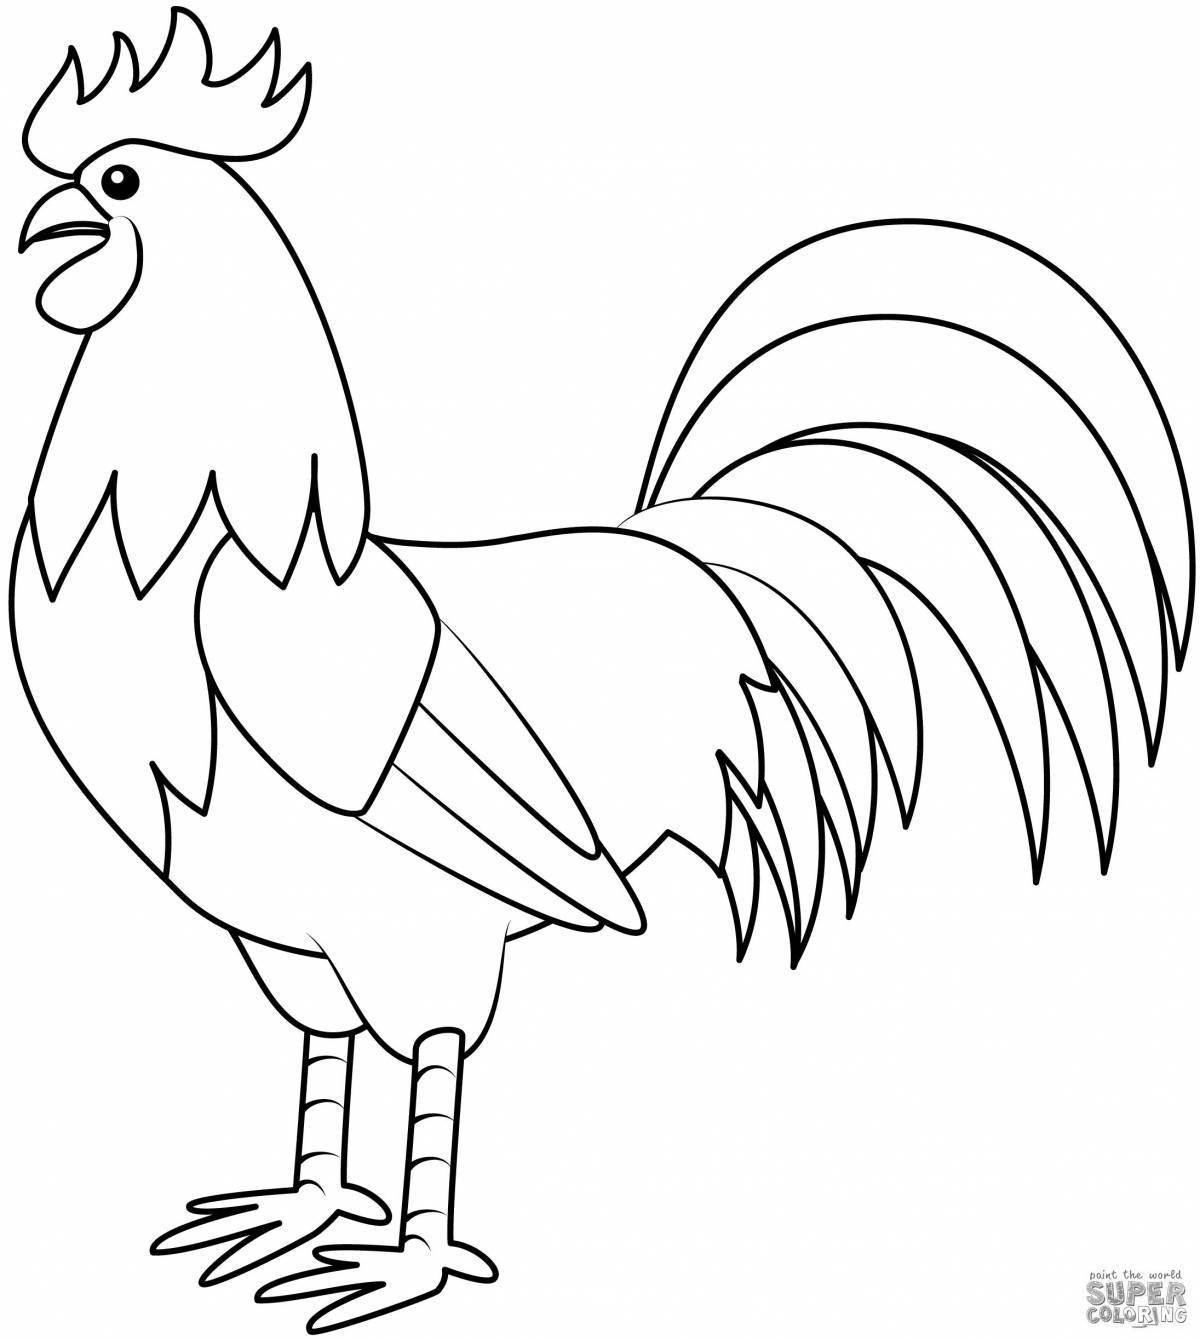 Coloring page of a colorful rooster